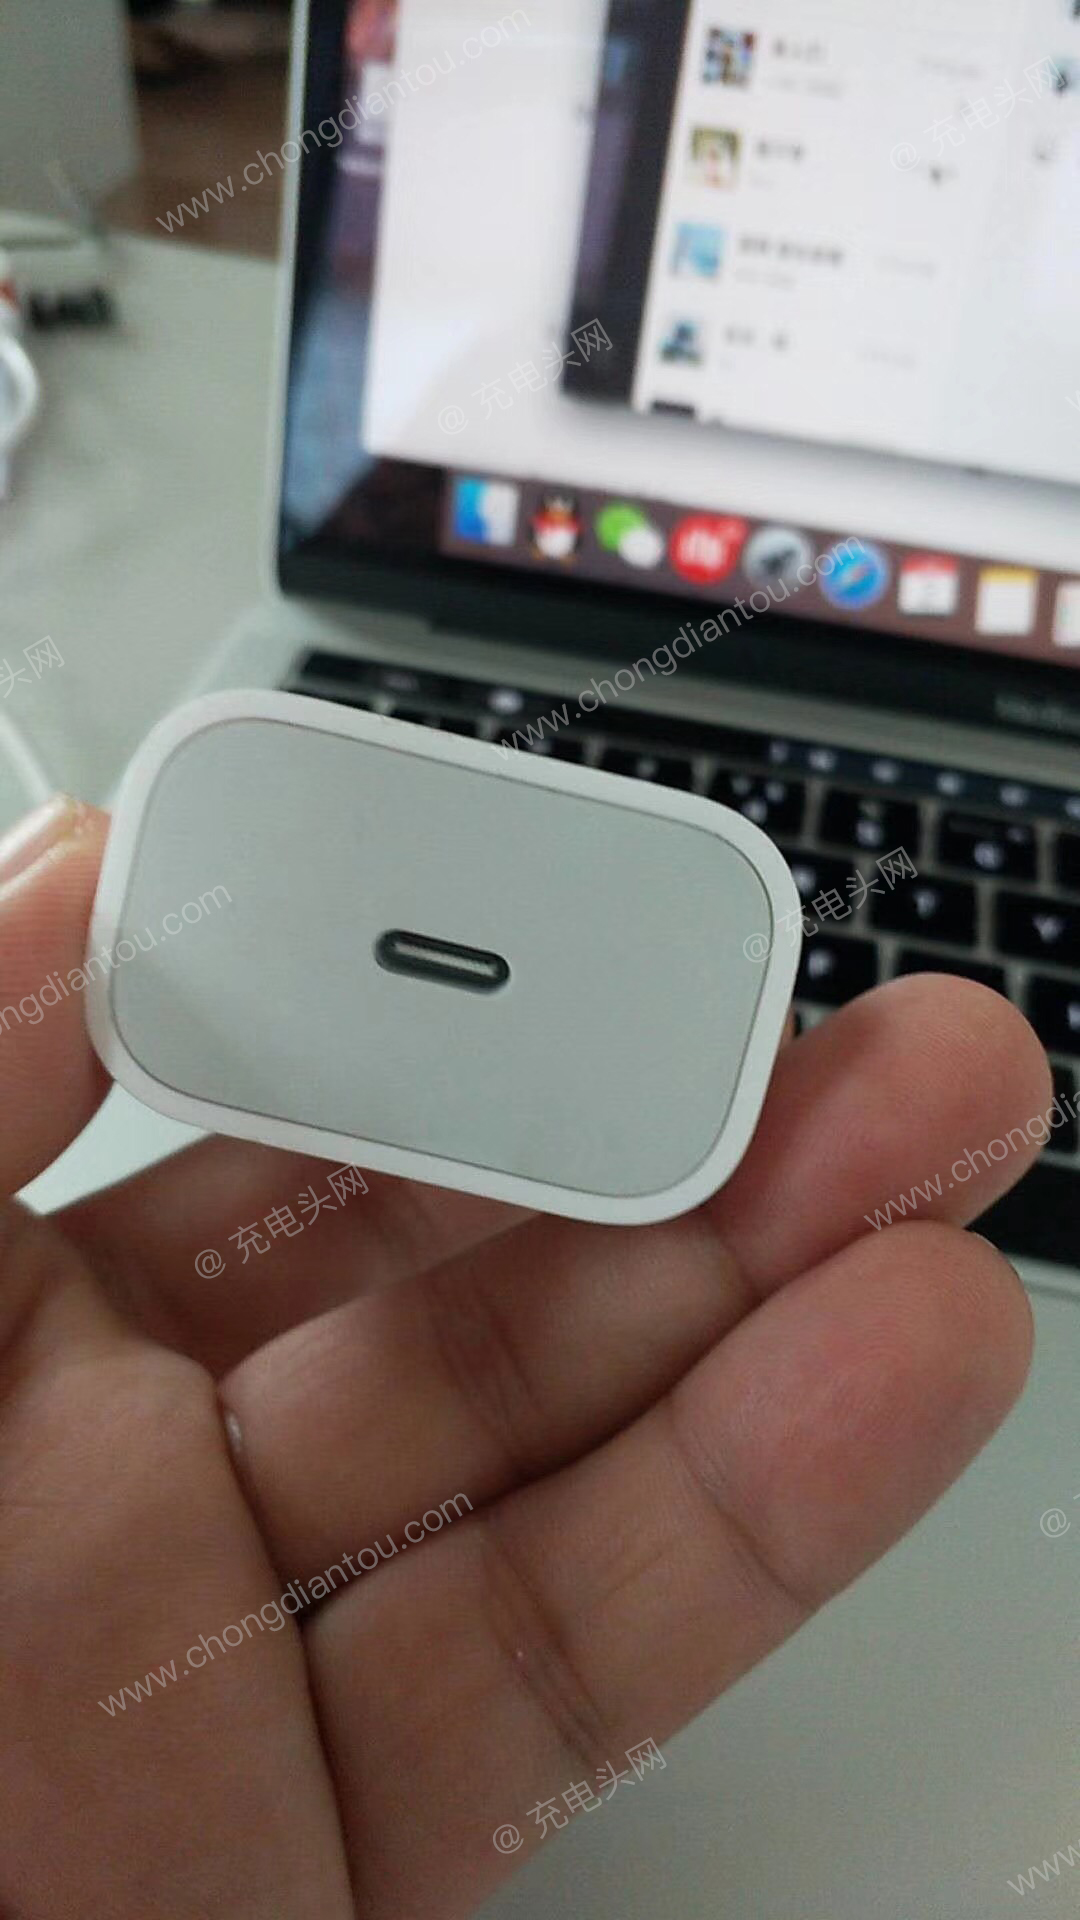 Leaked Photos of New Apple 18W USB-C iPhone Charger?